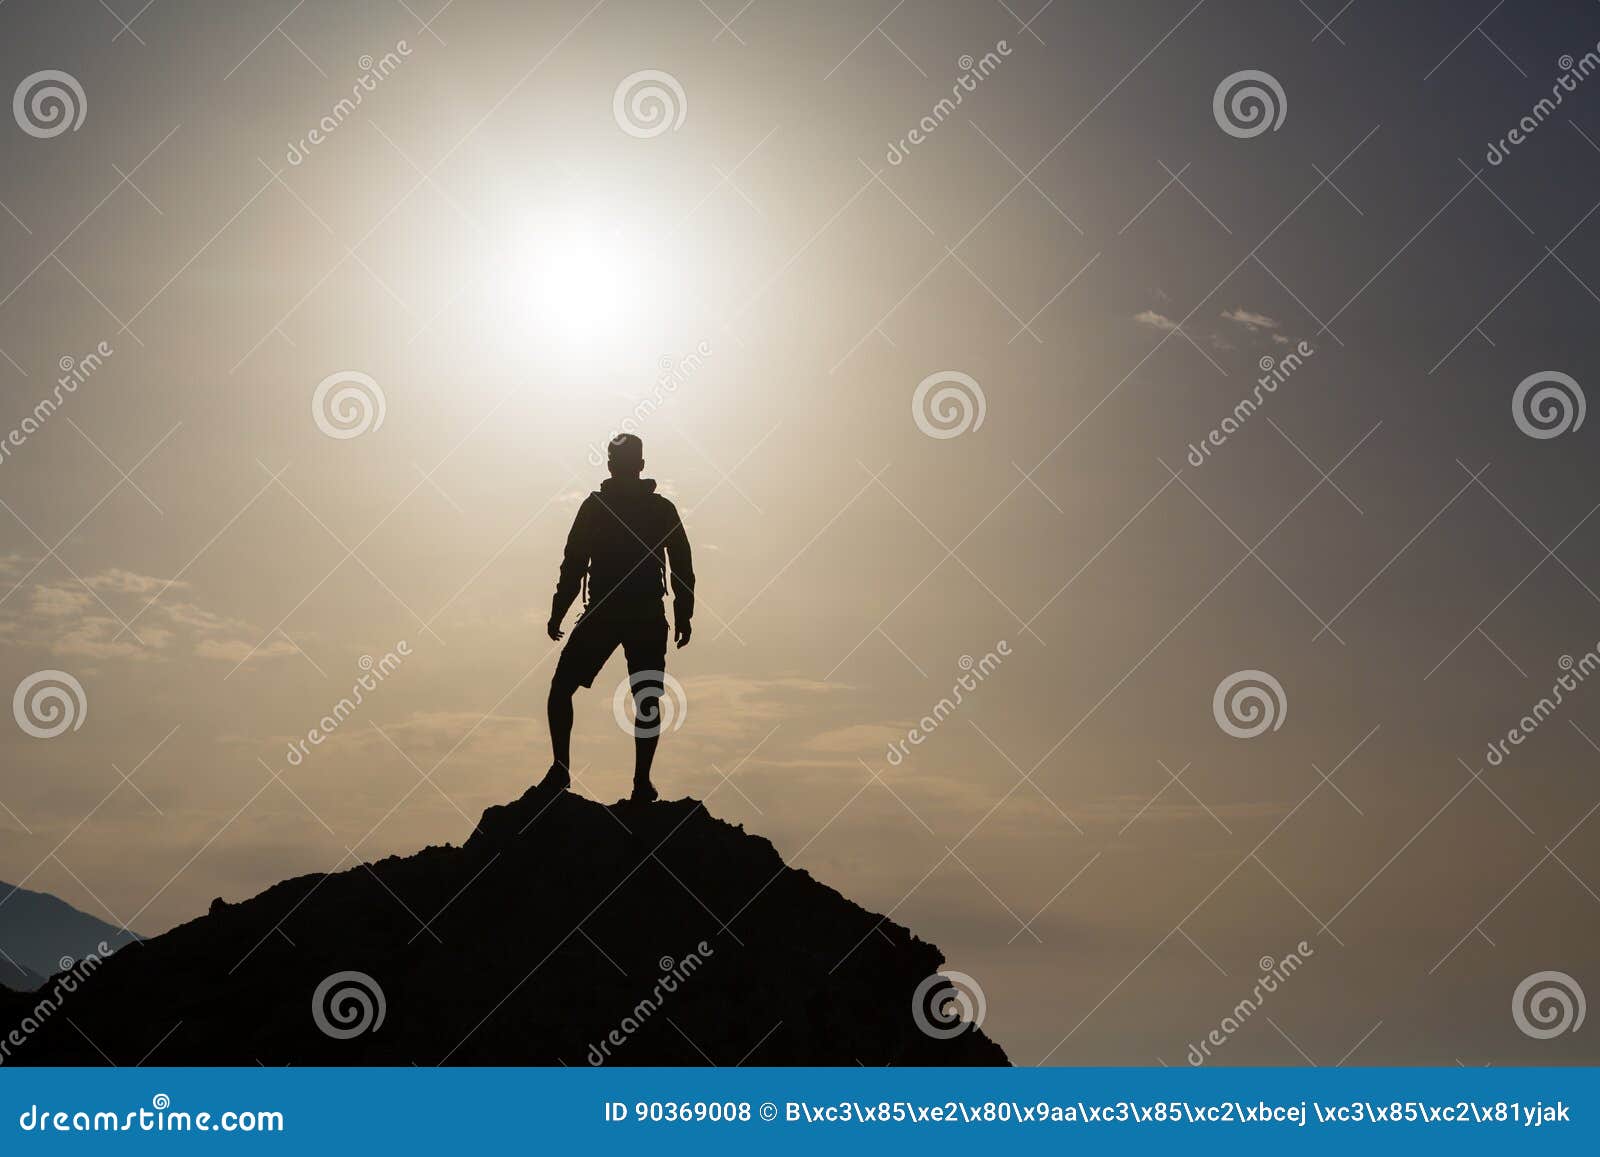 man looking and celebrating sunrise and landscape